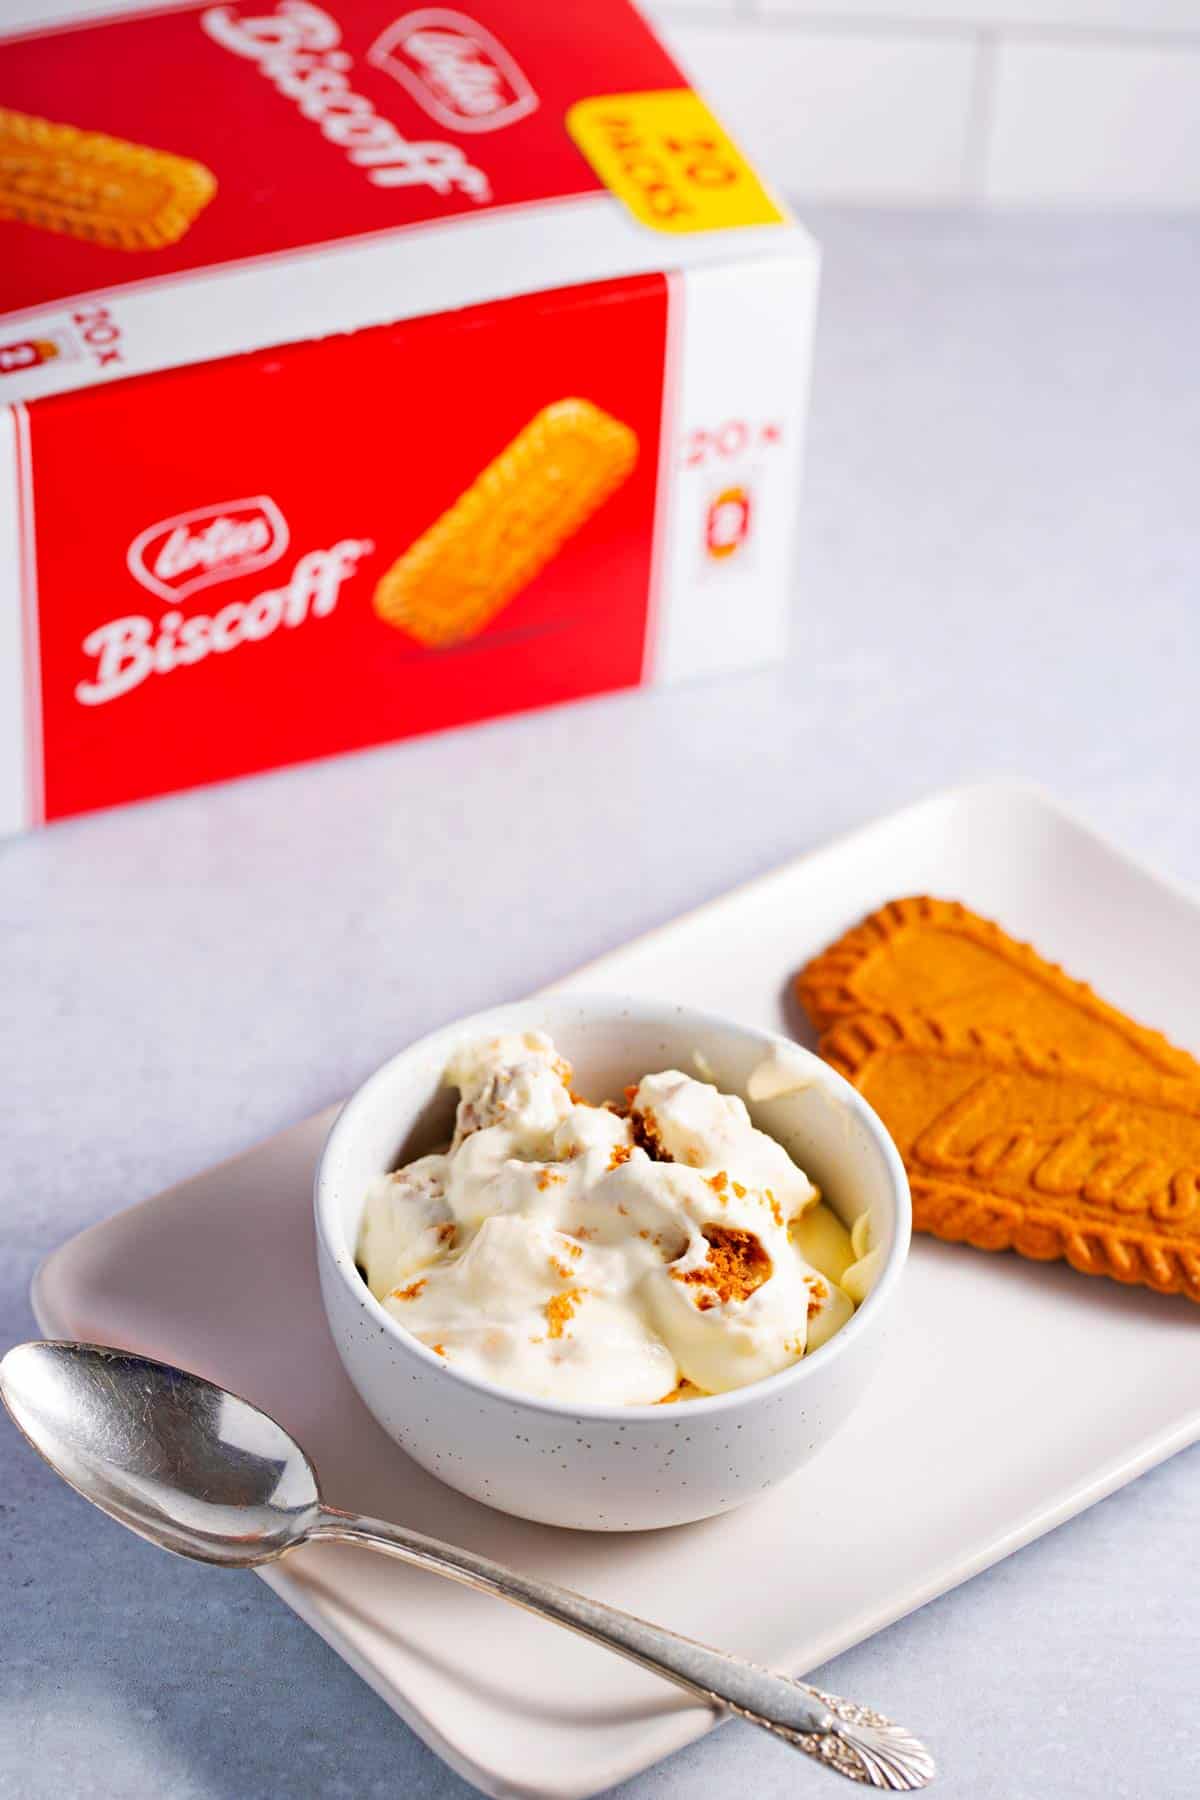 A bowl of banana pudding made with biscoff cookies with a box of Lotus biscoff cookies in the background.